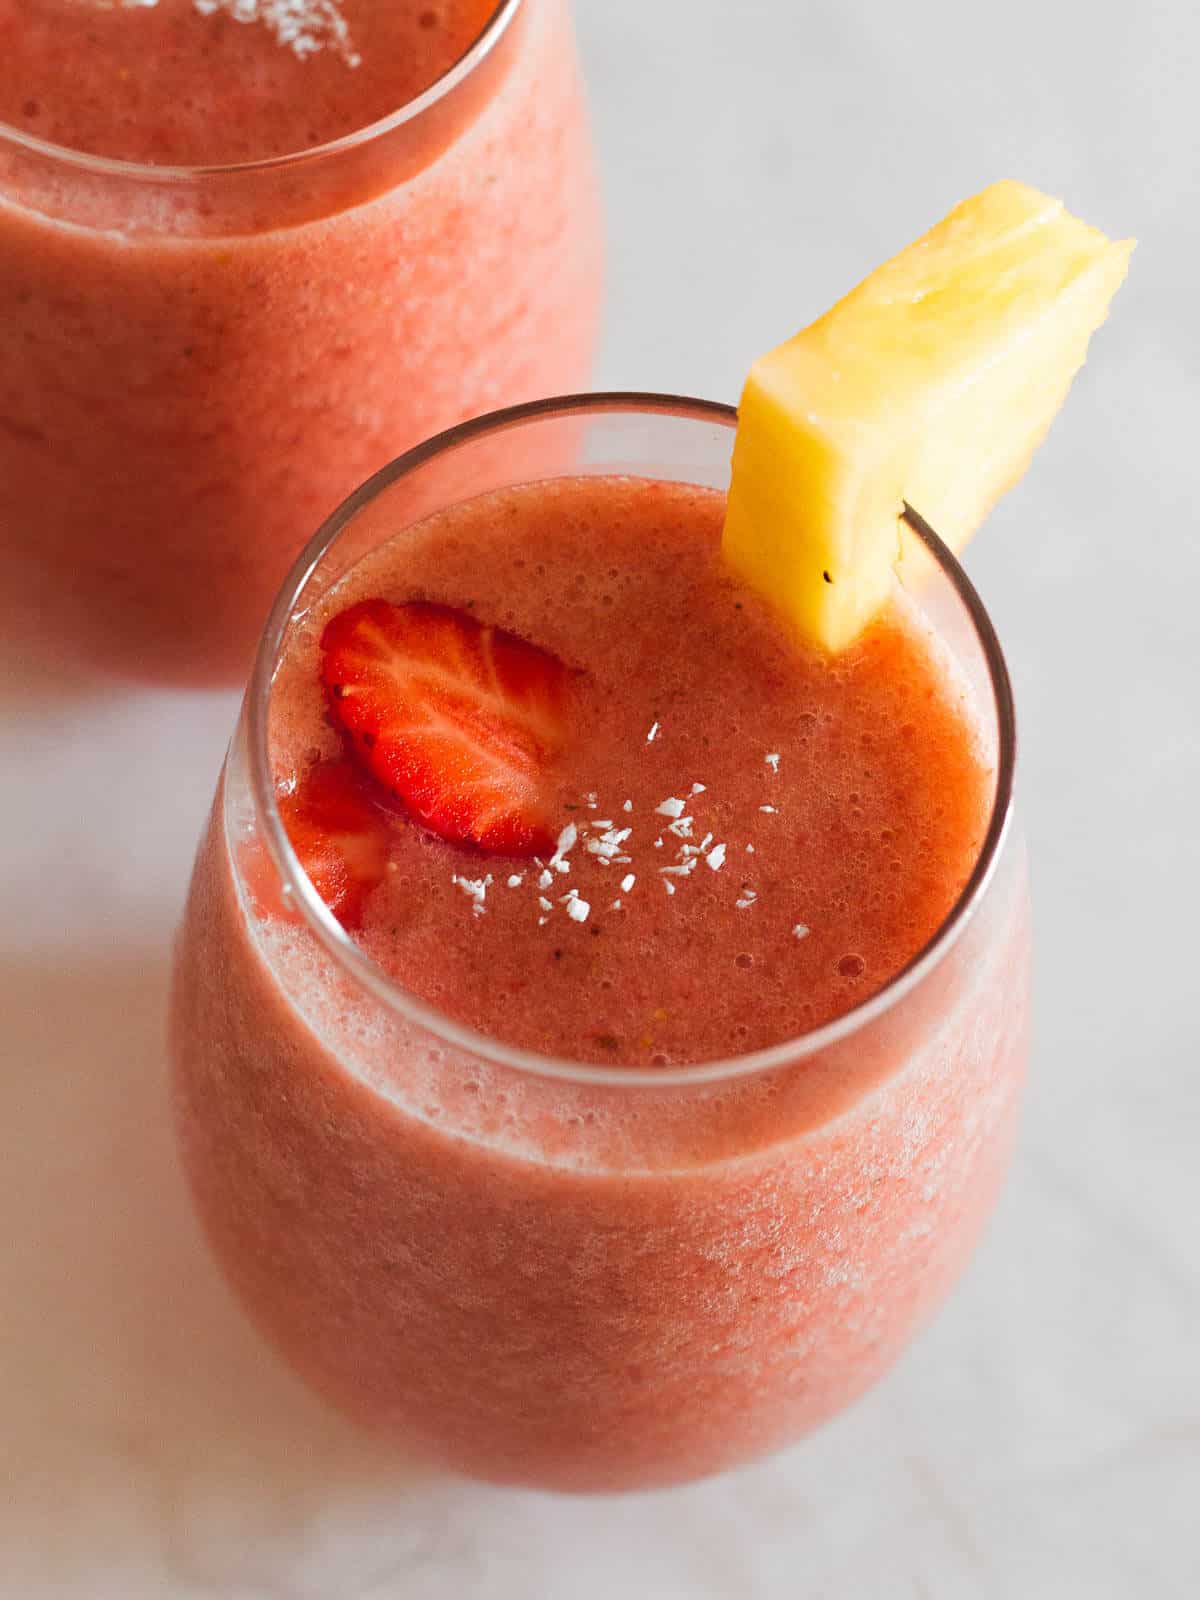 vegan pineapple strawberry smoothie  with shredded coconut on top and garnised with fresh pineapple and strawberry slices